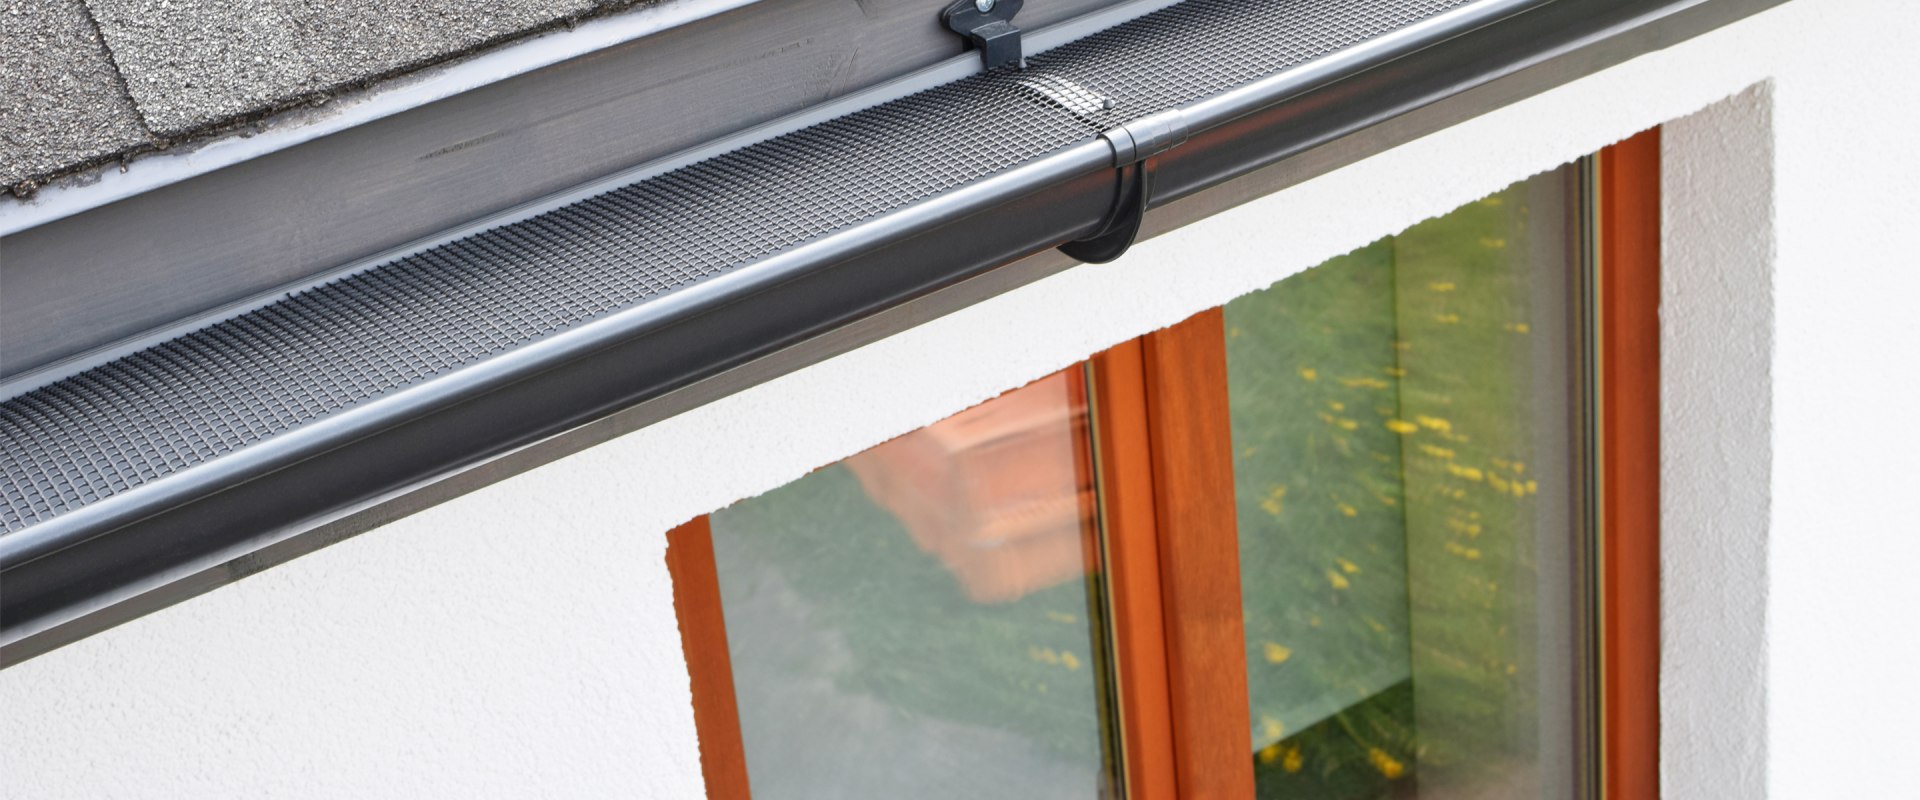 What is the Best Rain Gutter System?